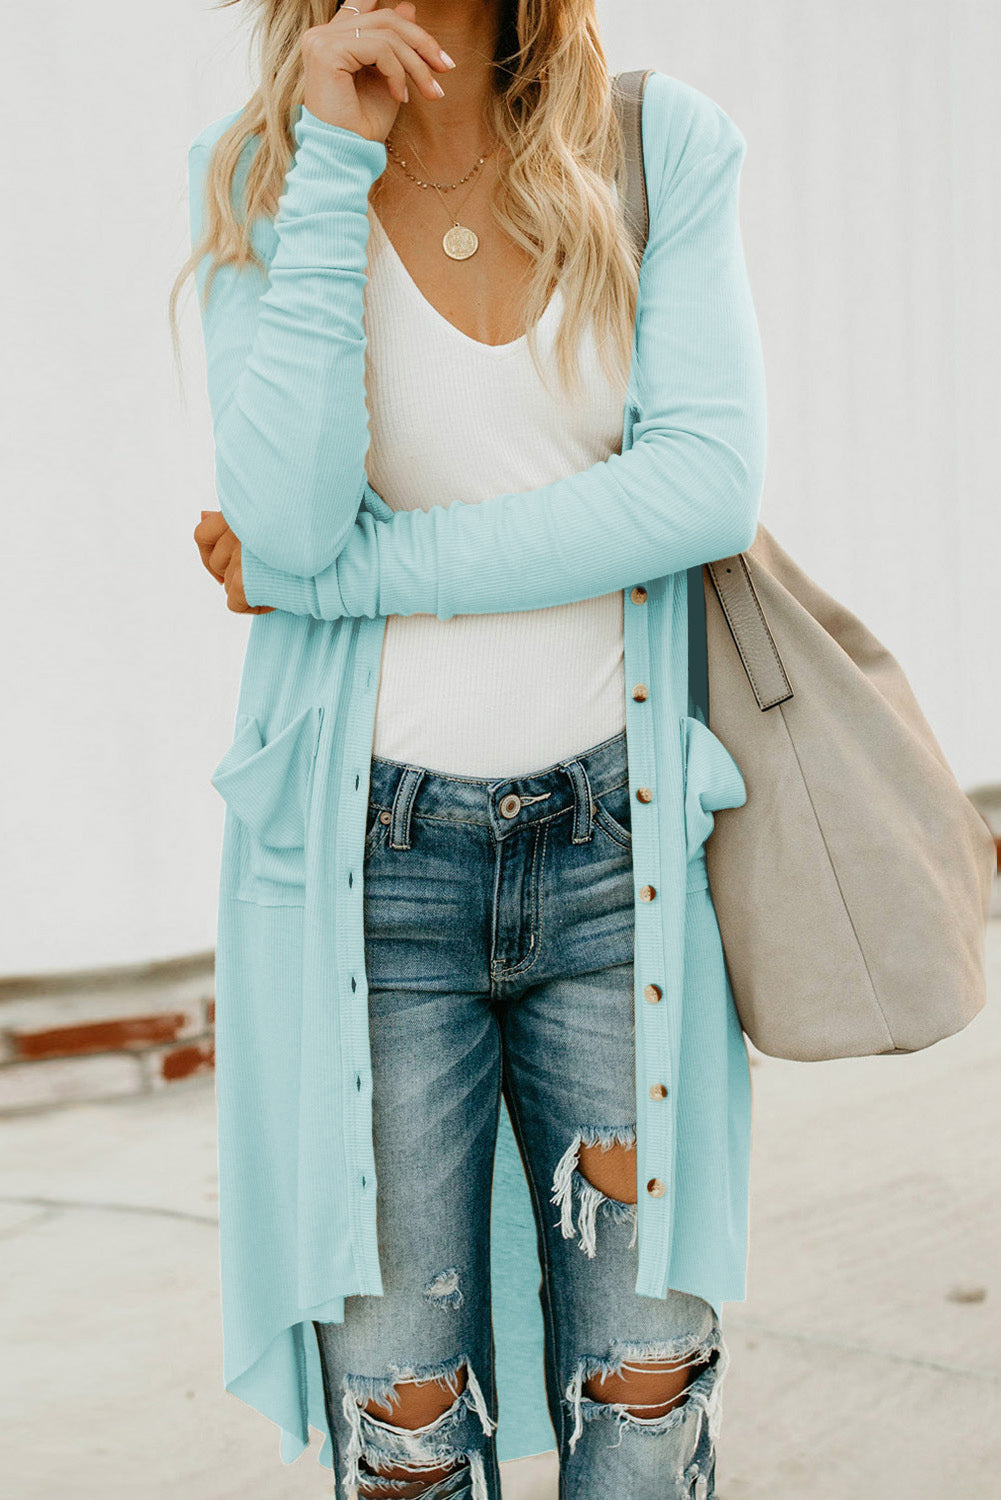 V-Neck Long Sleeve Cardigan with Pocket - Light Blue / S - Women’s Clothing & Accessories - Shirts & Tops - 23 - 2024